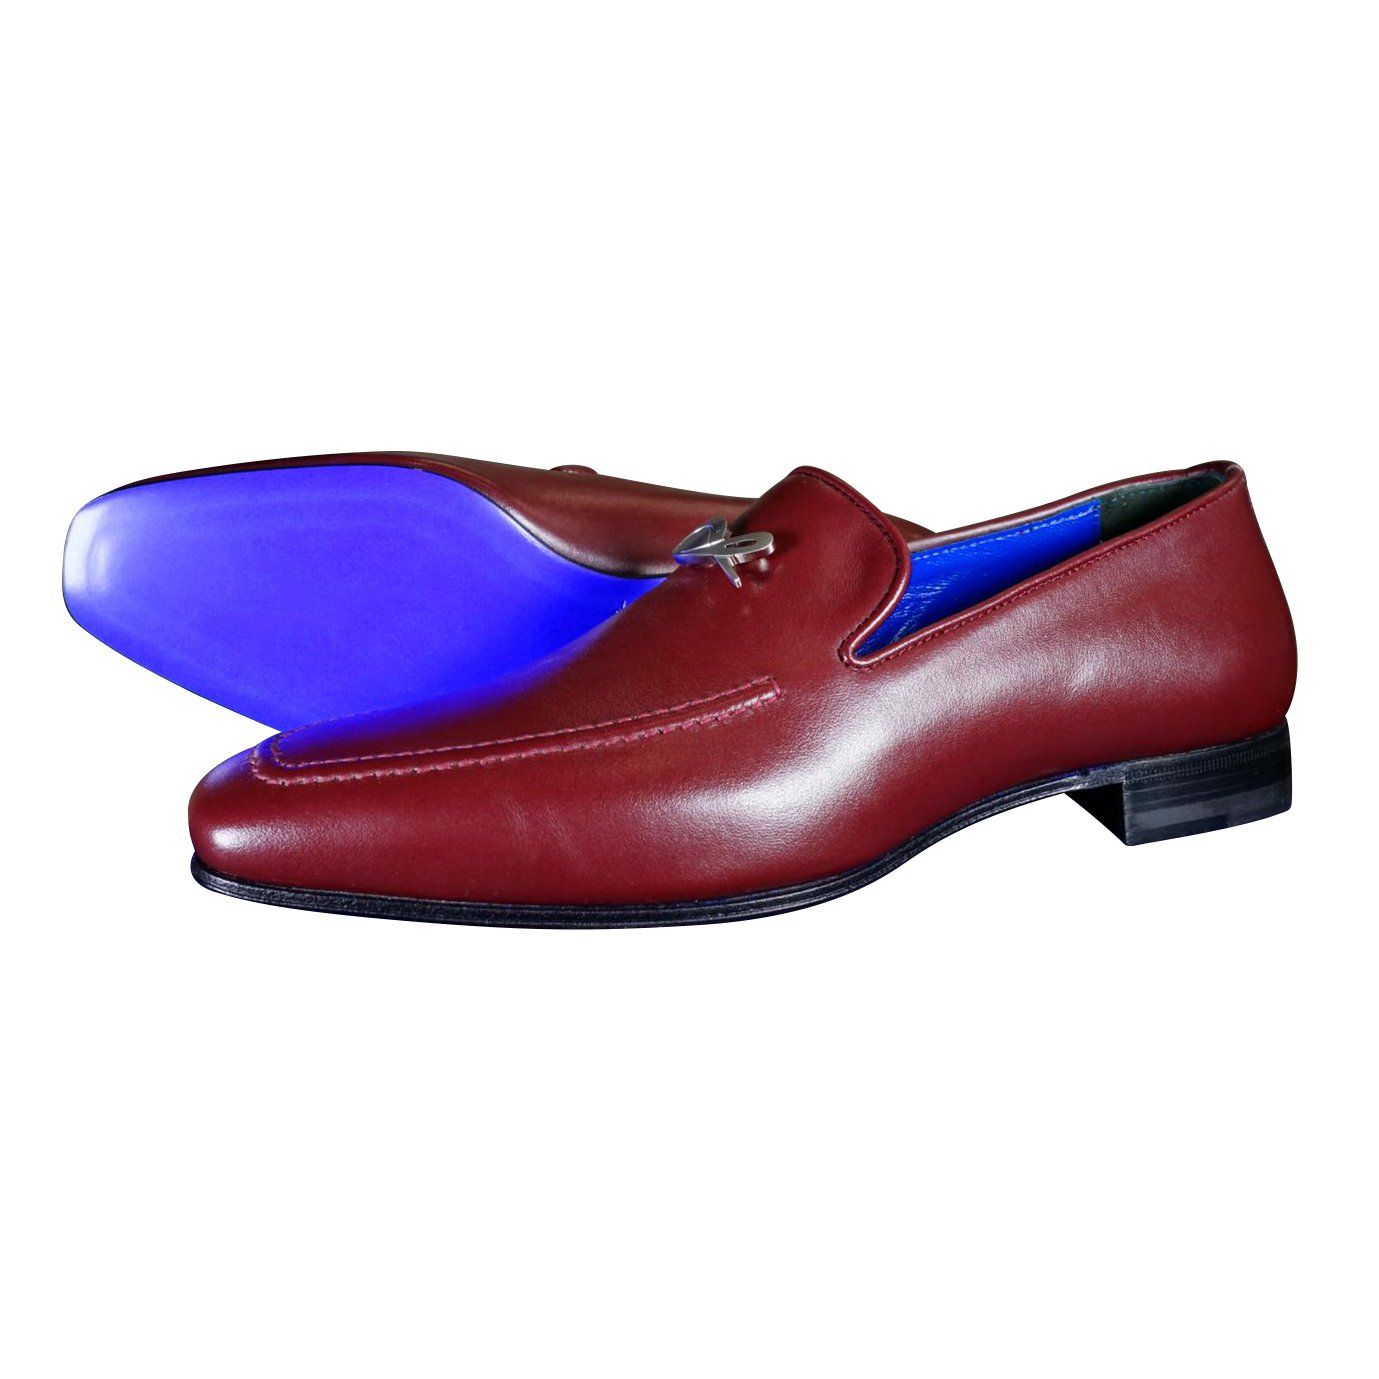 Bordo With Silver Hardware Leather Loafers